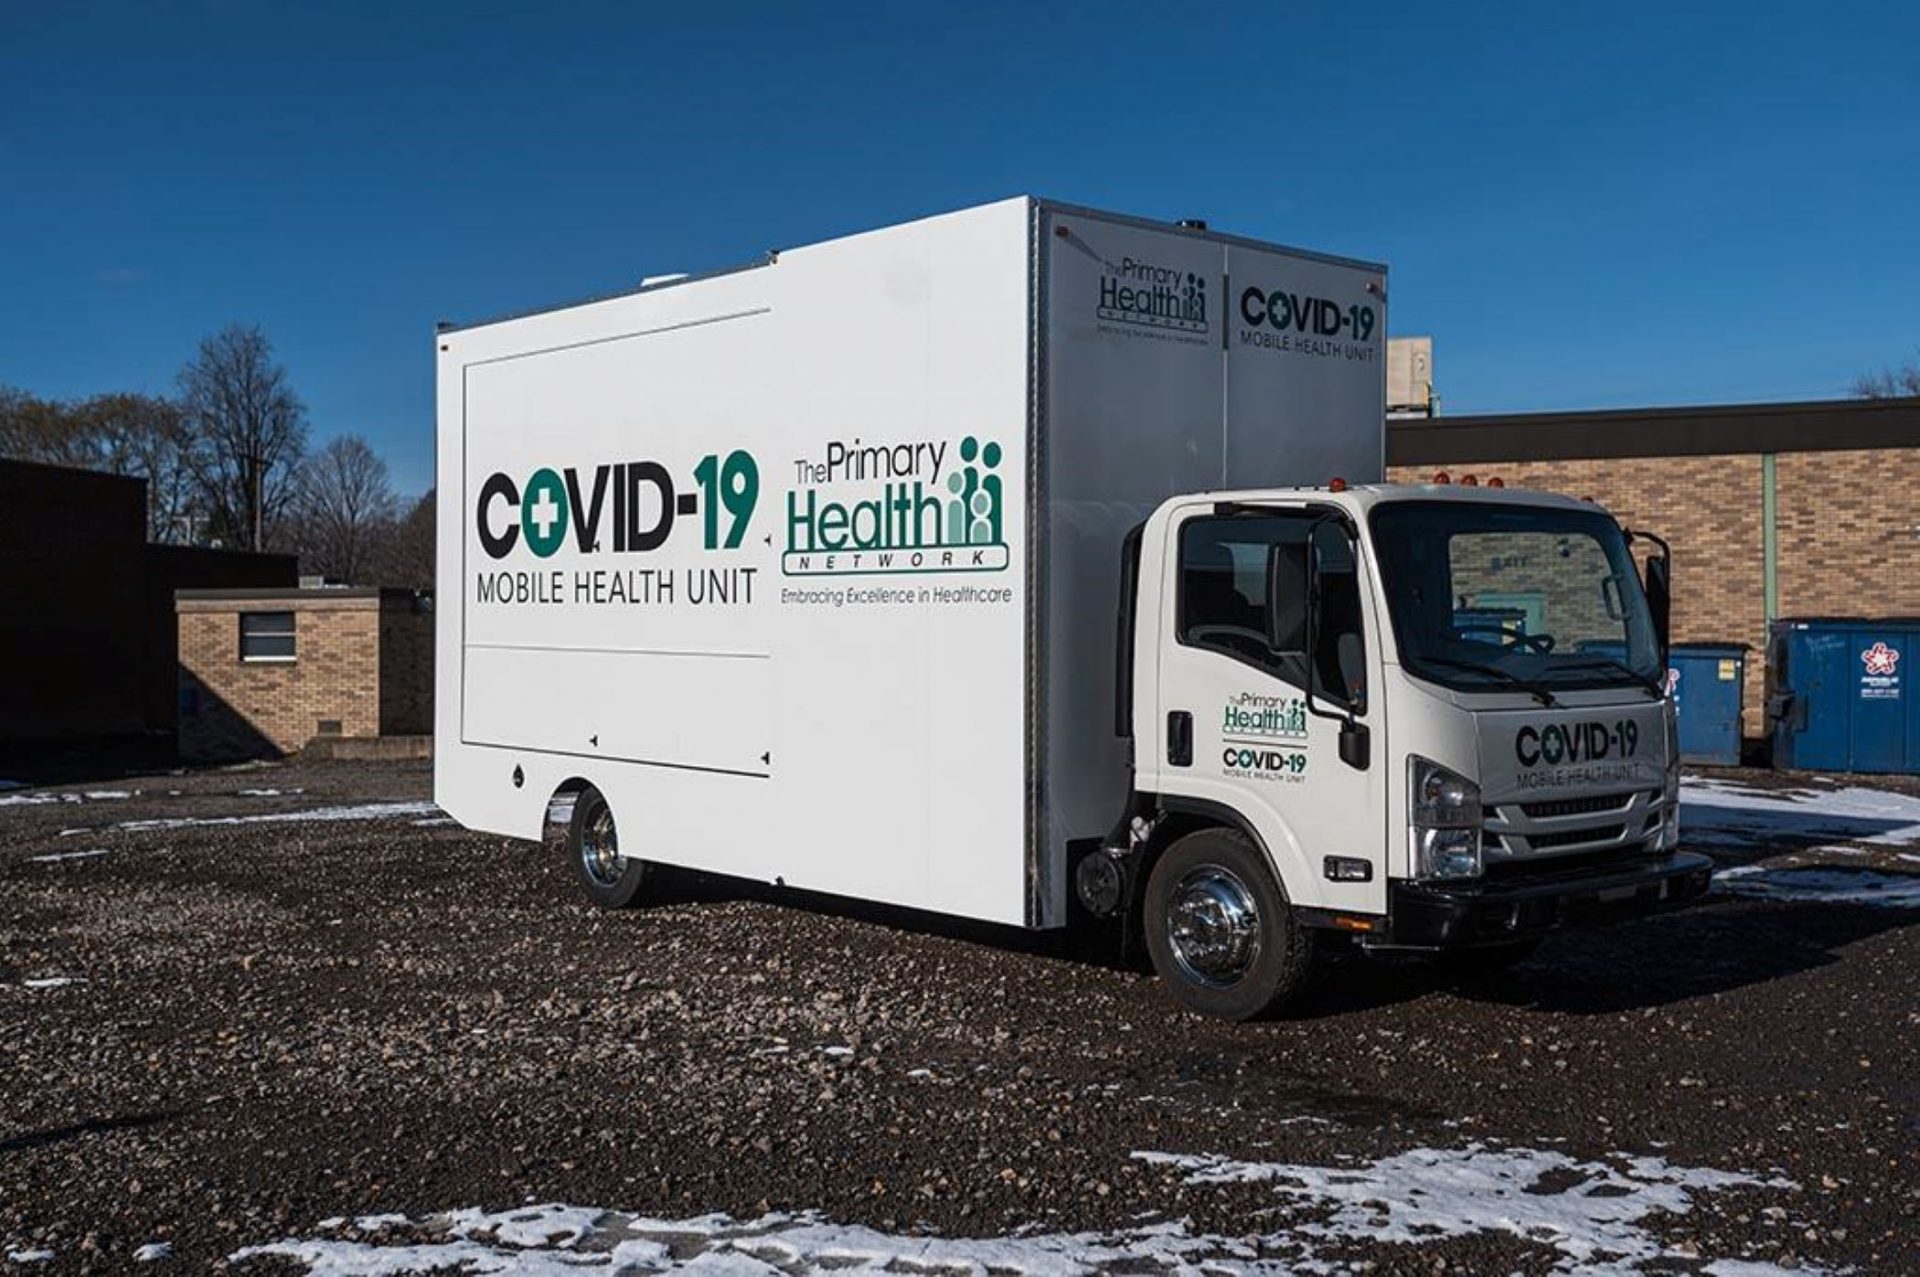 Rural healthcare providers told lawmakers during a public hearing on Jan. 13 that adapting vaccine delivery for rural communities, such as using mobile health trucks like the one pictured, is key.